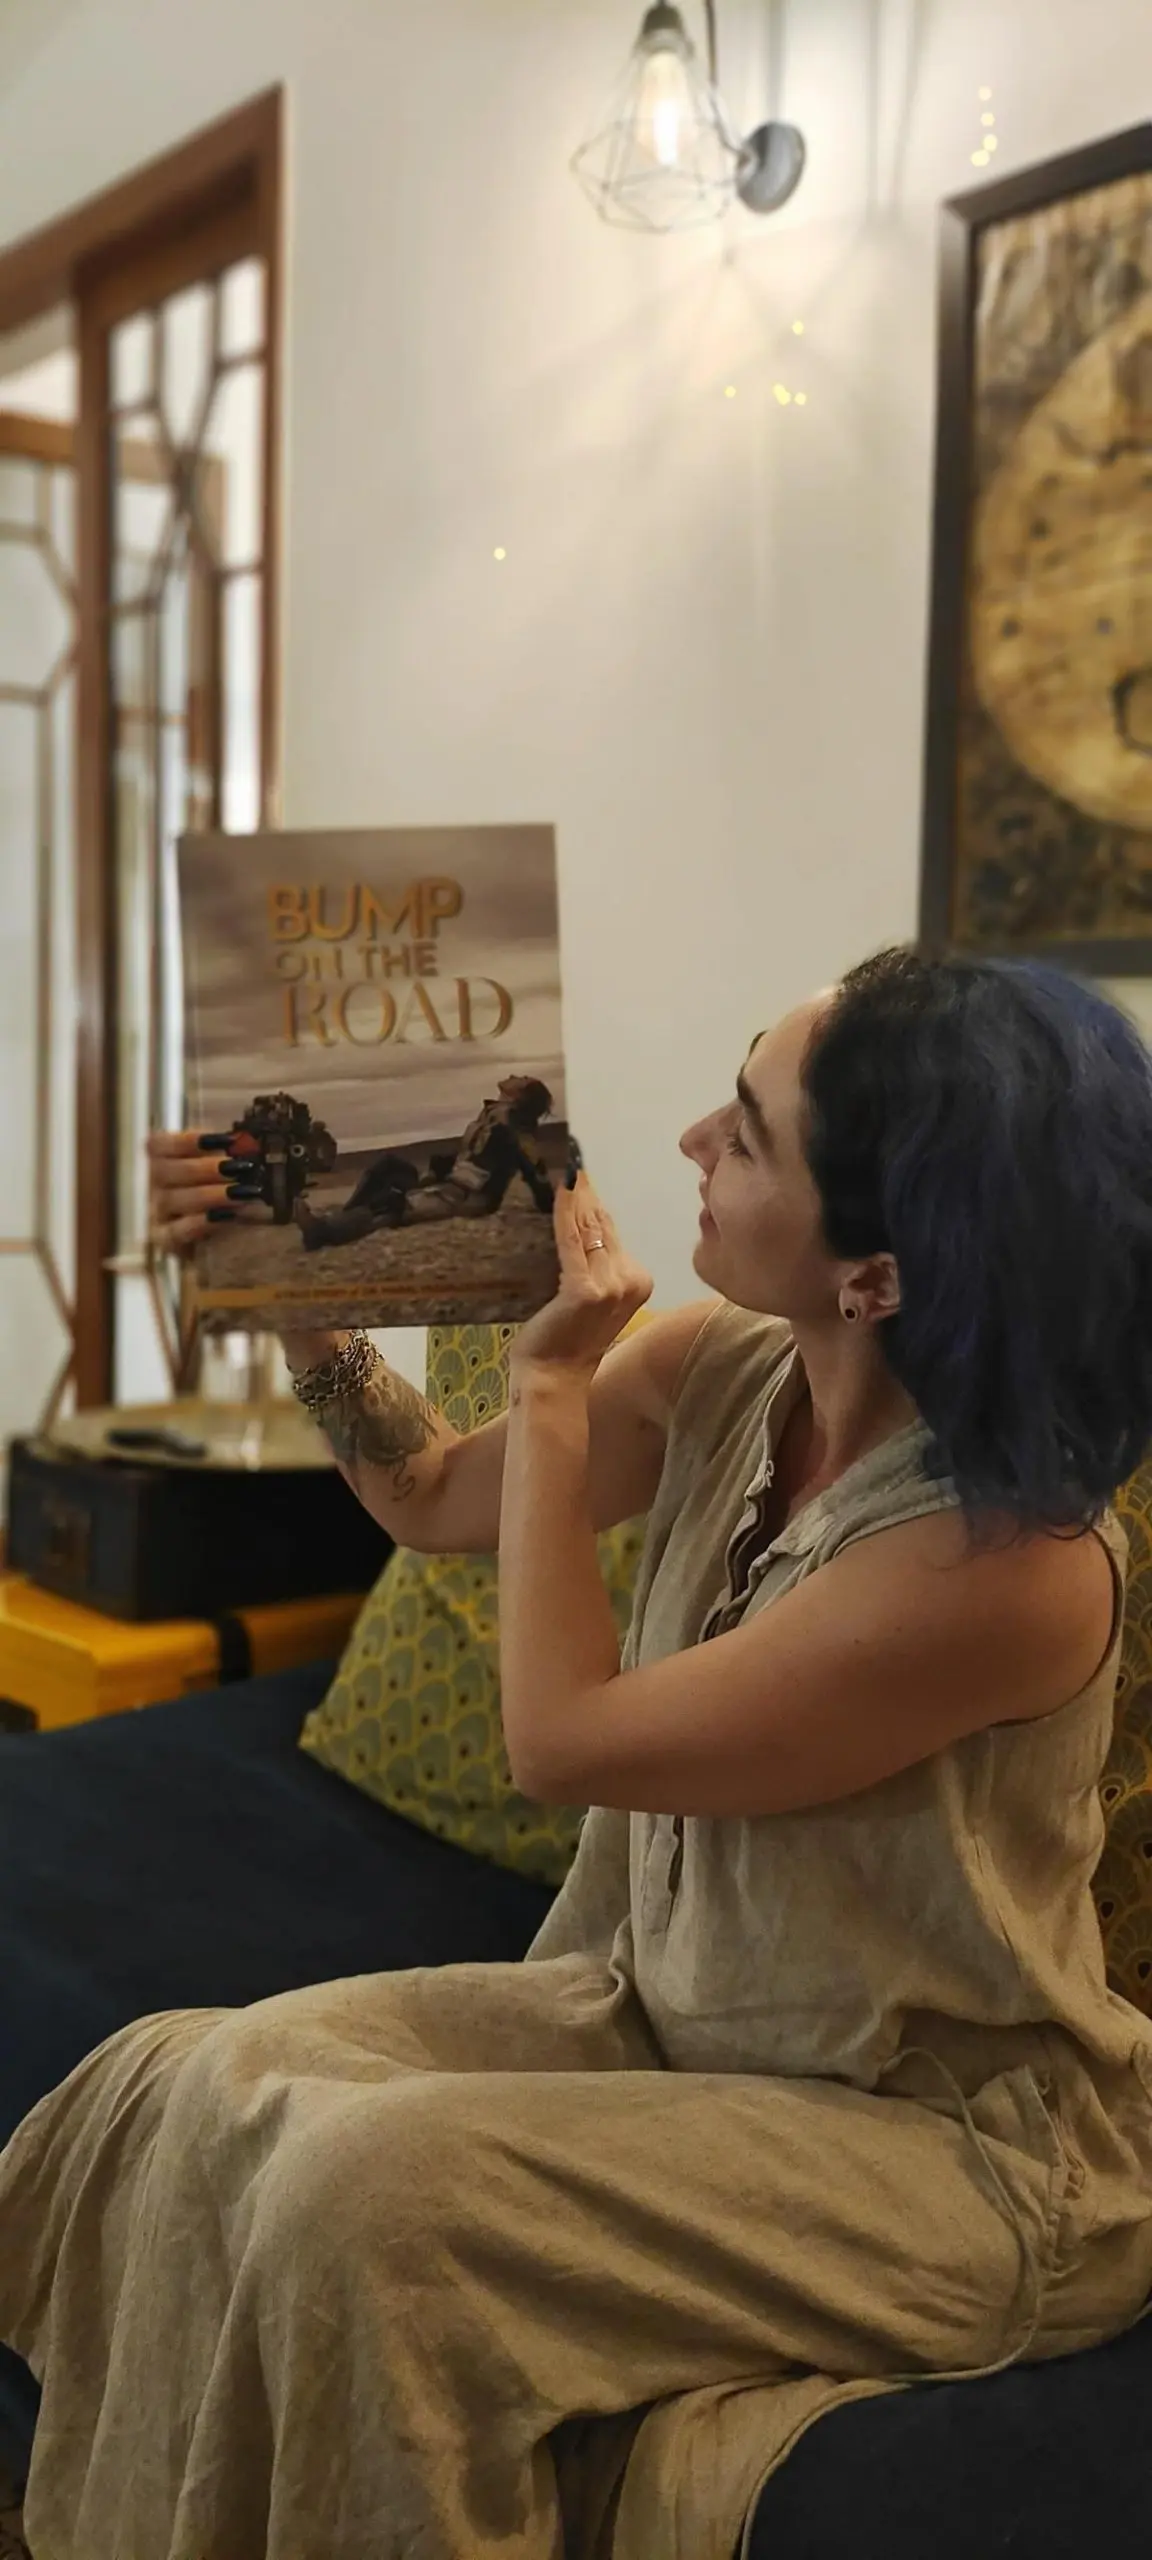 Maral Yazarloo Pattrick with her book, Bump on the Road, that captured her ride which spanned 18 months, covered 7 continents, 64 countries, and 110,000 kilometres